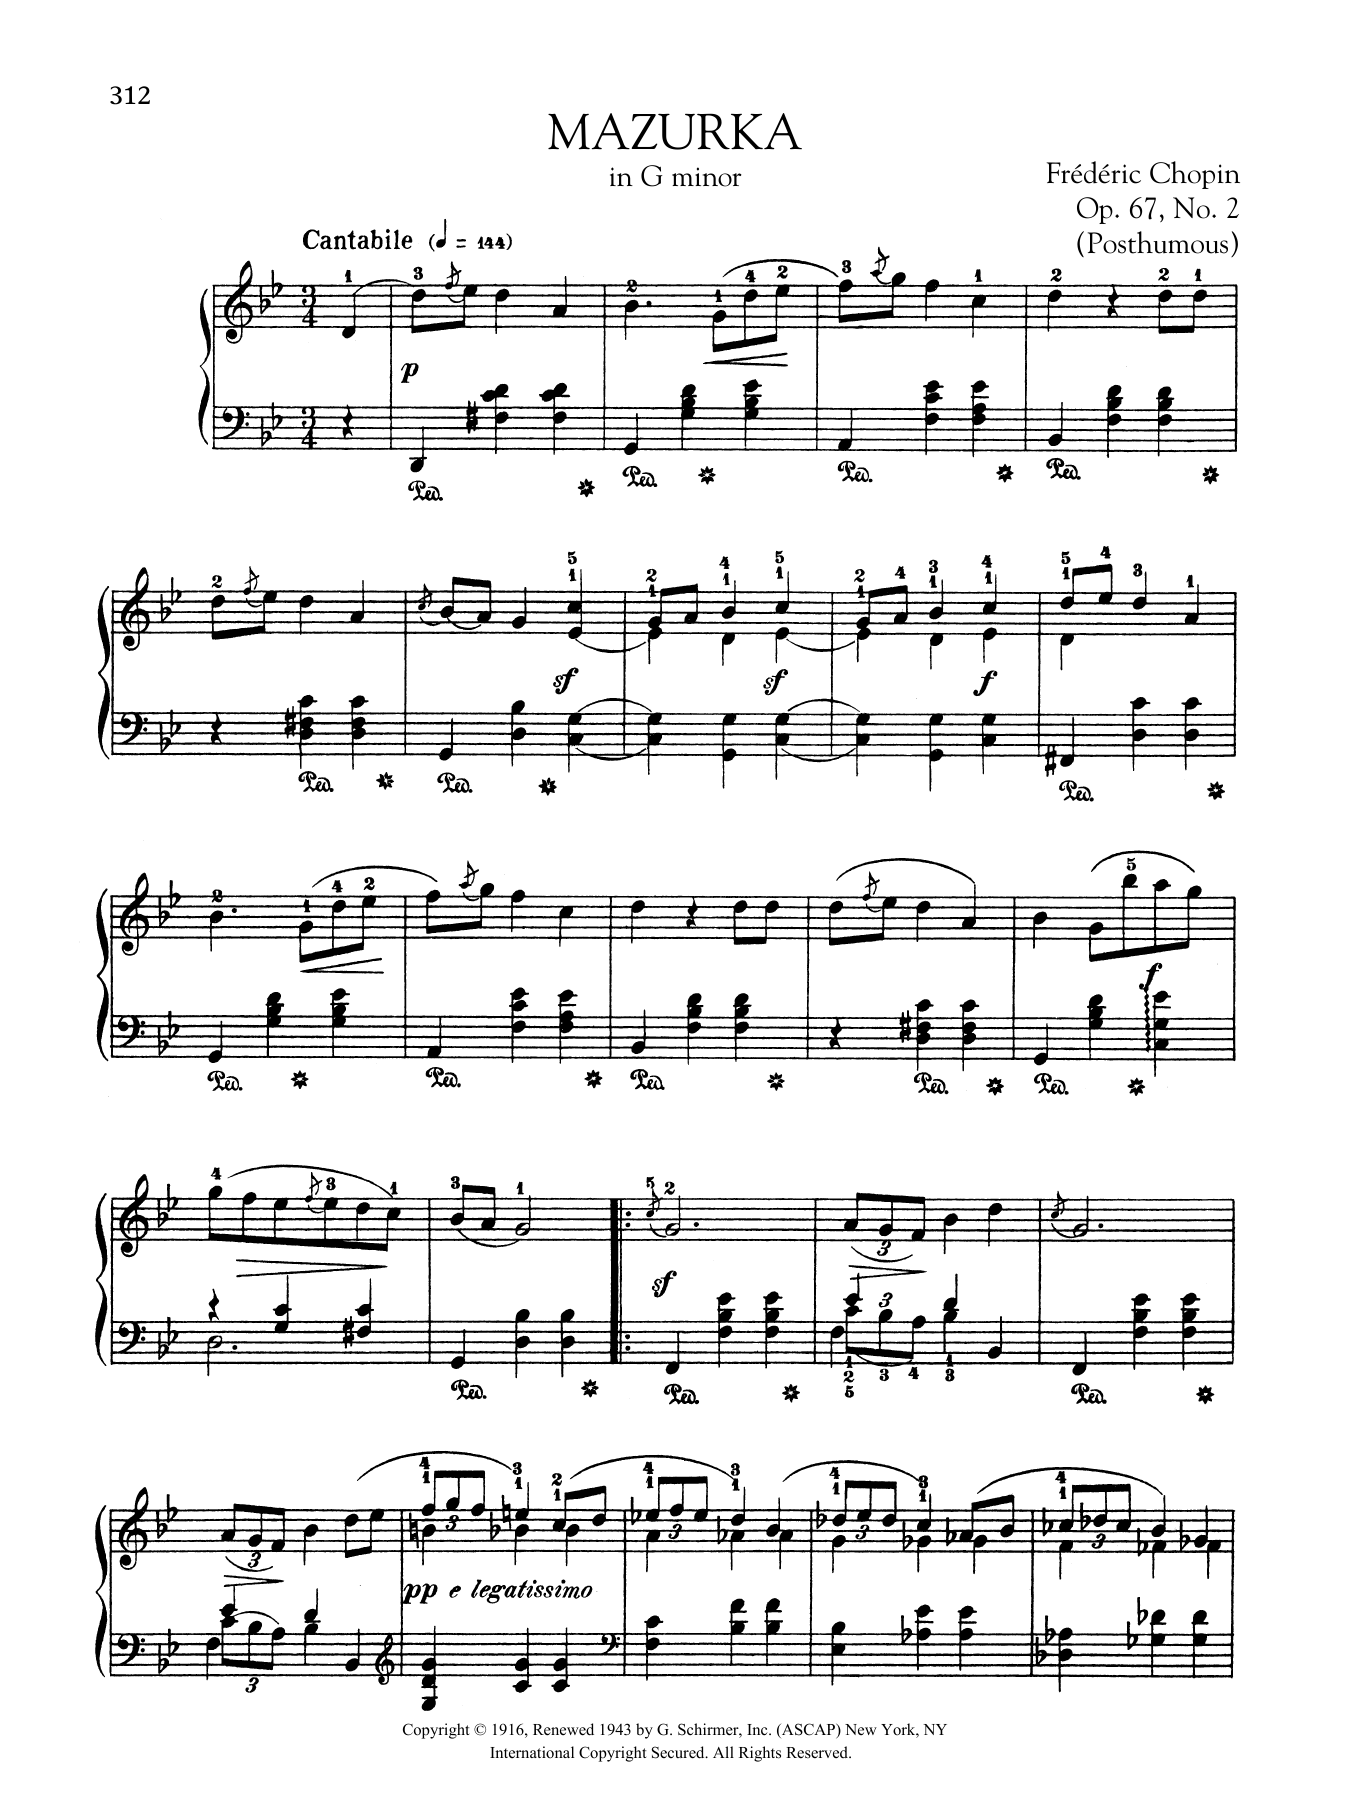 Frédéric Chopin Mazurka in G minor, Op. 67, No. 2 (Posthumous) sheet music notes and chords. Download Printable PDF.